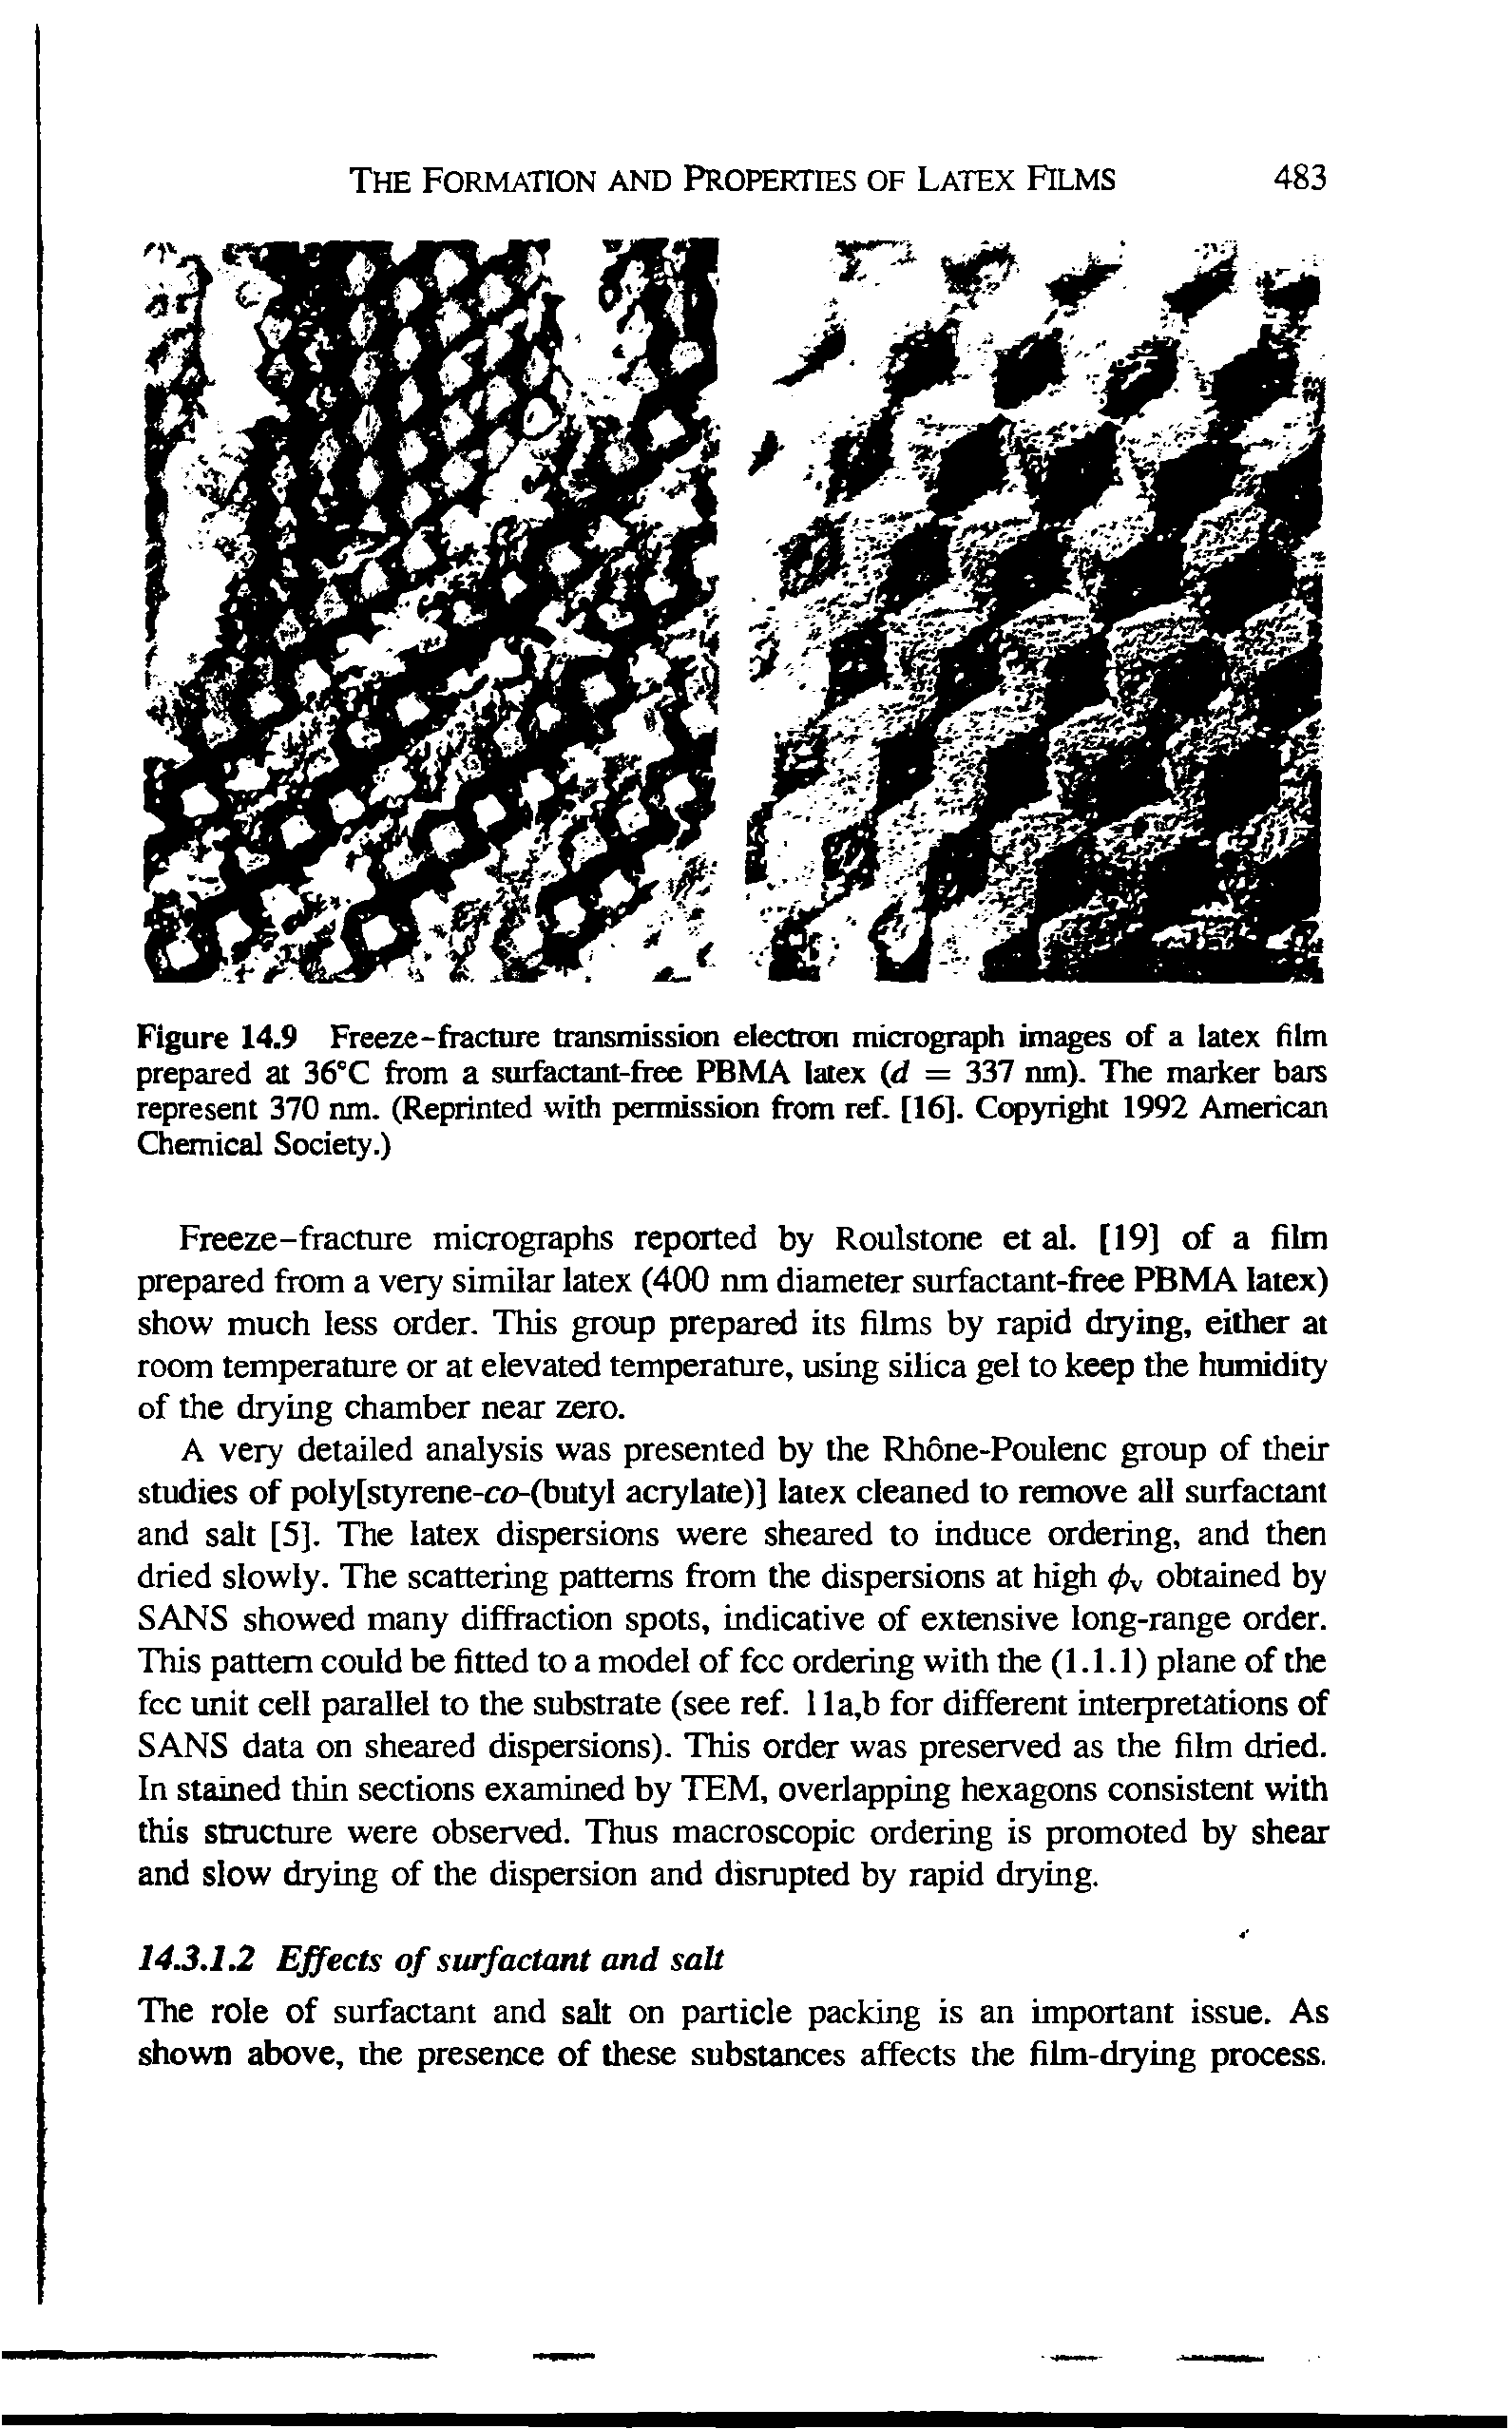 Figure 14.9 Freeze-fracture transmission electron micrograph images of a latex film prepared at 36°C from a surfrtctant-free PBMA latex (<f = 337 nm). The maiicer bars represent 370 nm. (Reprinted with permission from ref. [16]. Copyright 1992 American Chemical Society.)...